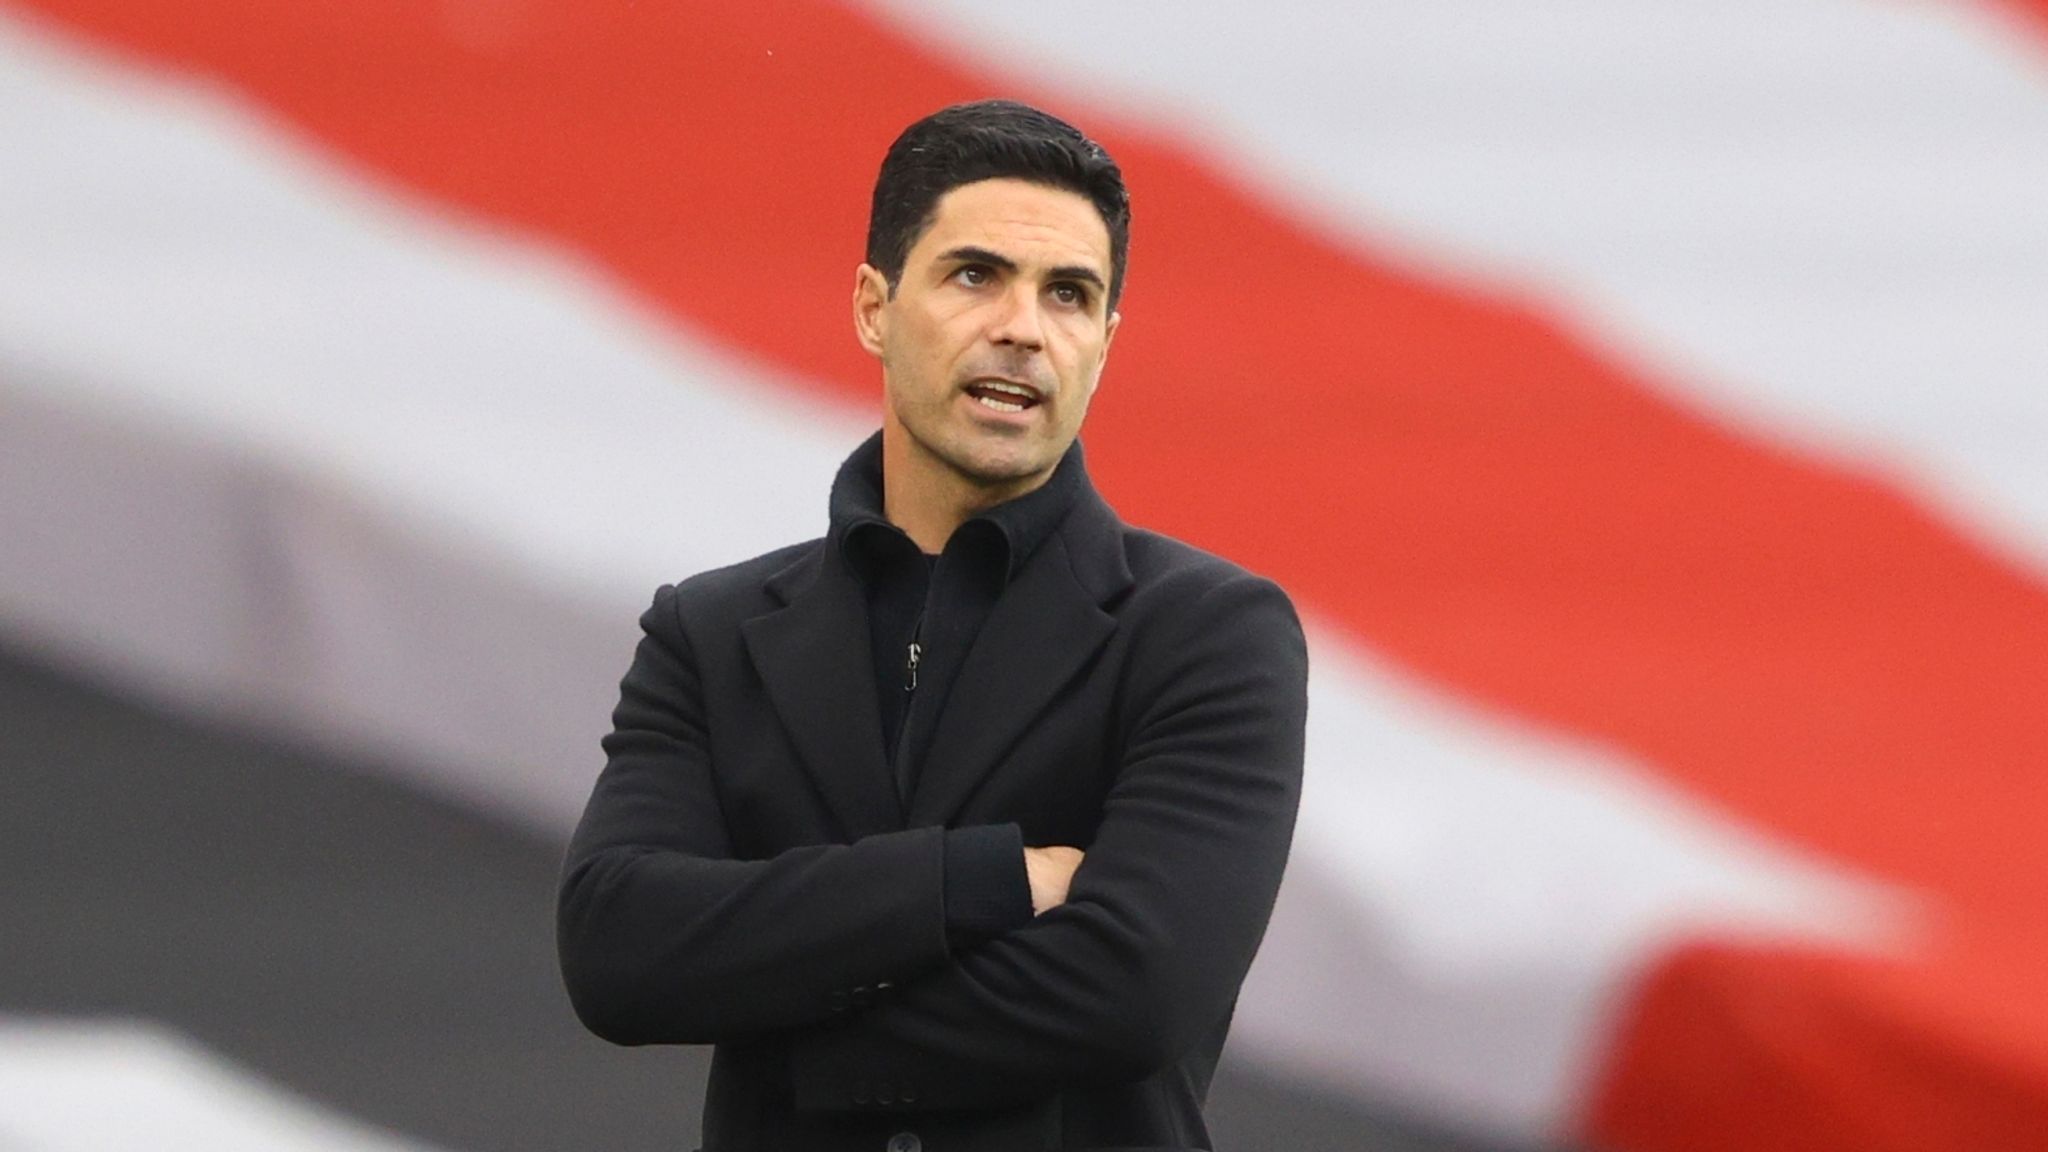 Mikel Arteta: Arsenal boss excited to take club forward with owner&#39;s support after season of unprecedented challenges | Football News | Sky Sports